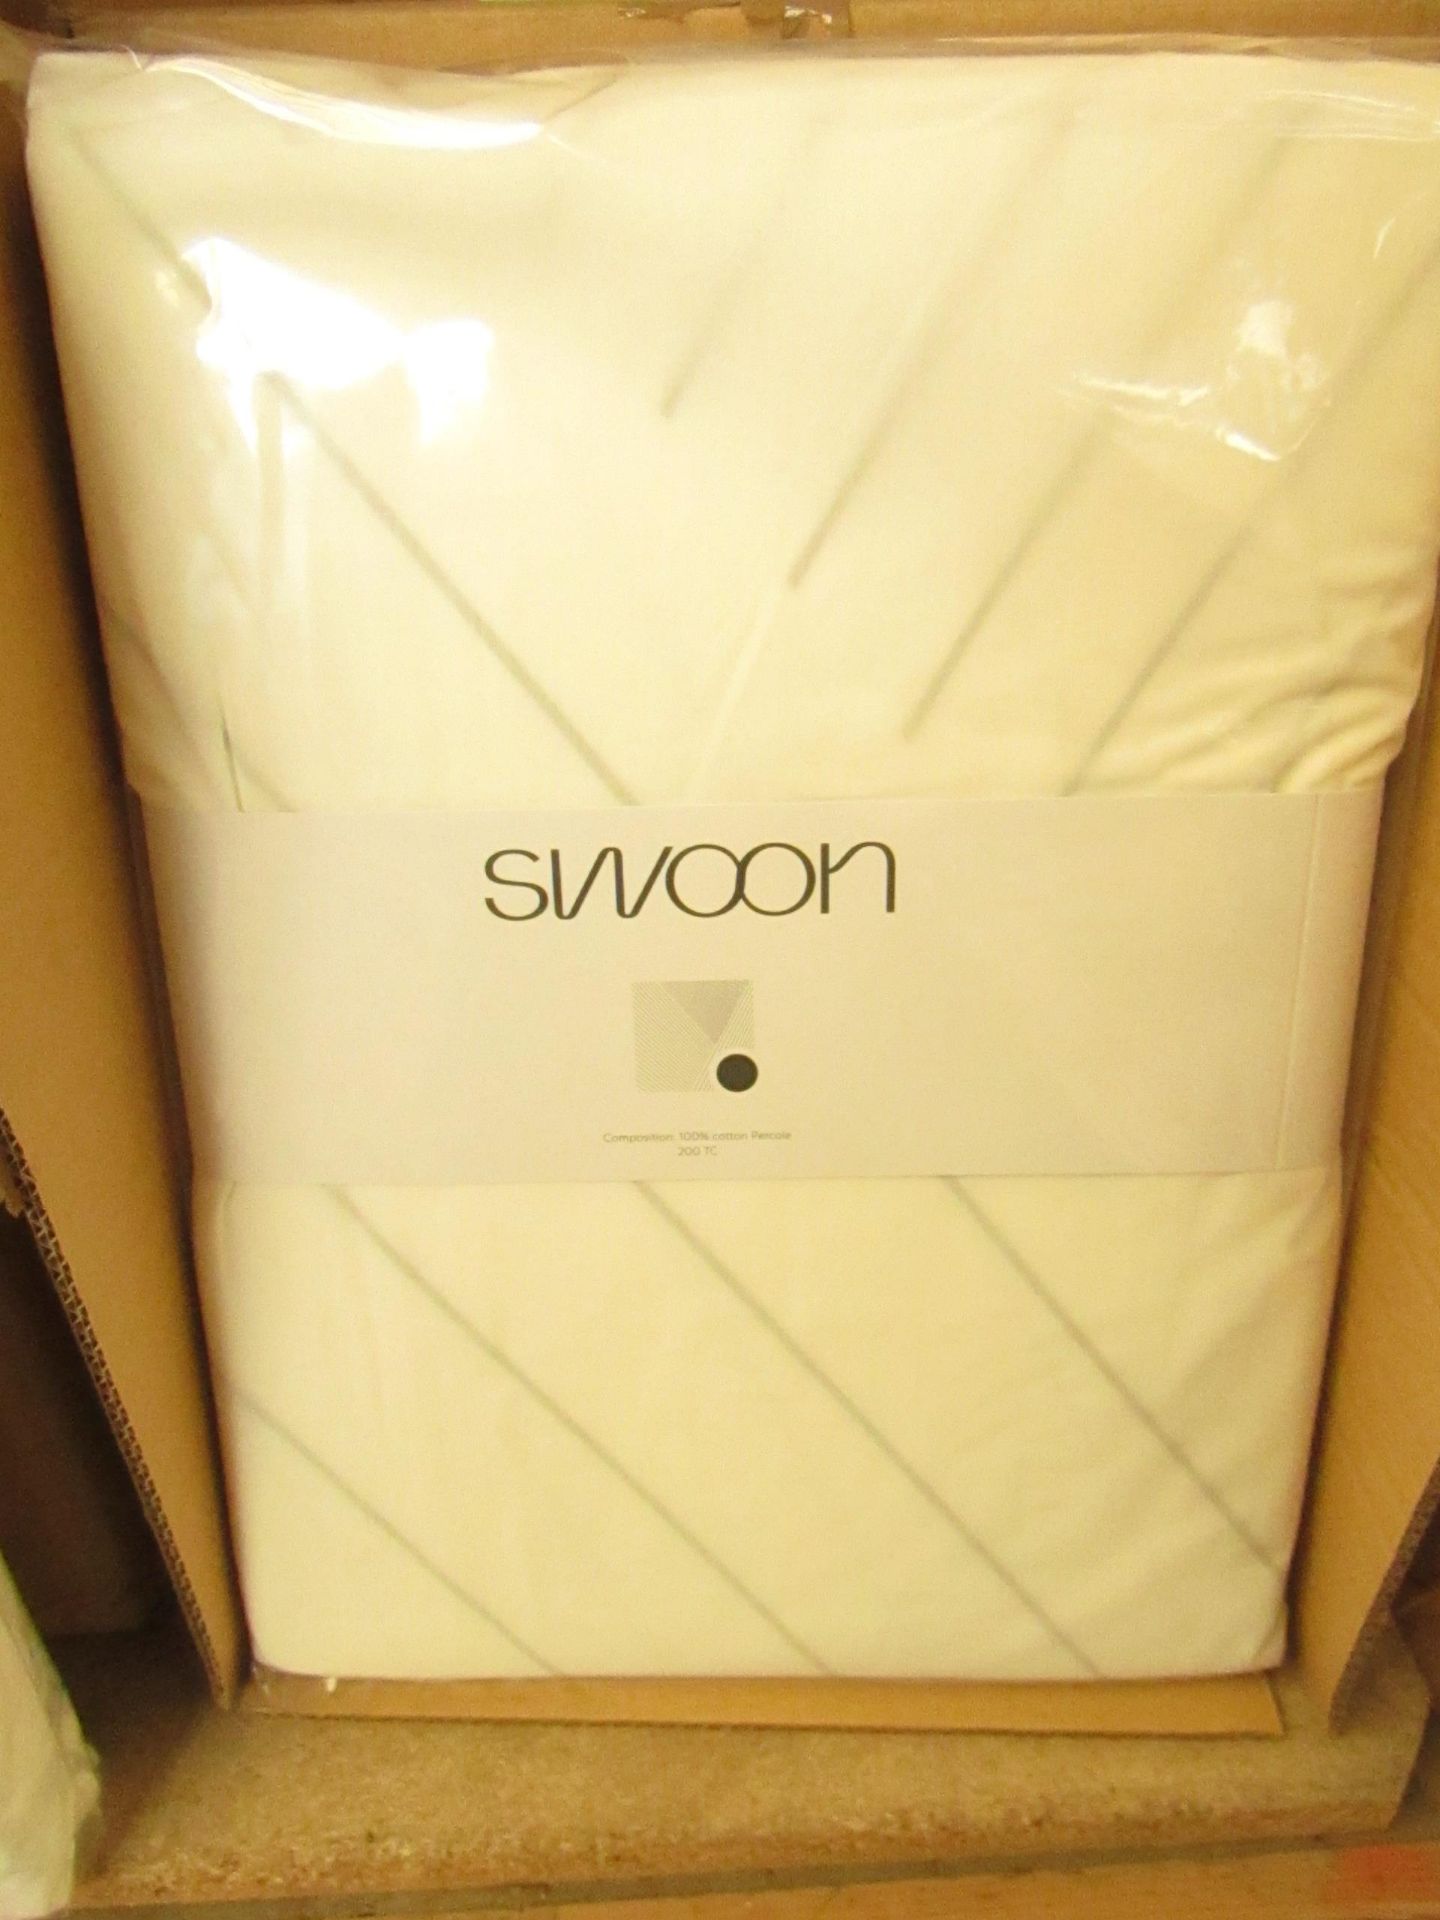 |1x SWOON BOOLE GREY KING SIZE DUVET SET THAT INCLUDE DUVET COVER AND 2 MATCHING PILLOW CASES |